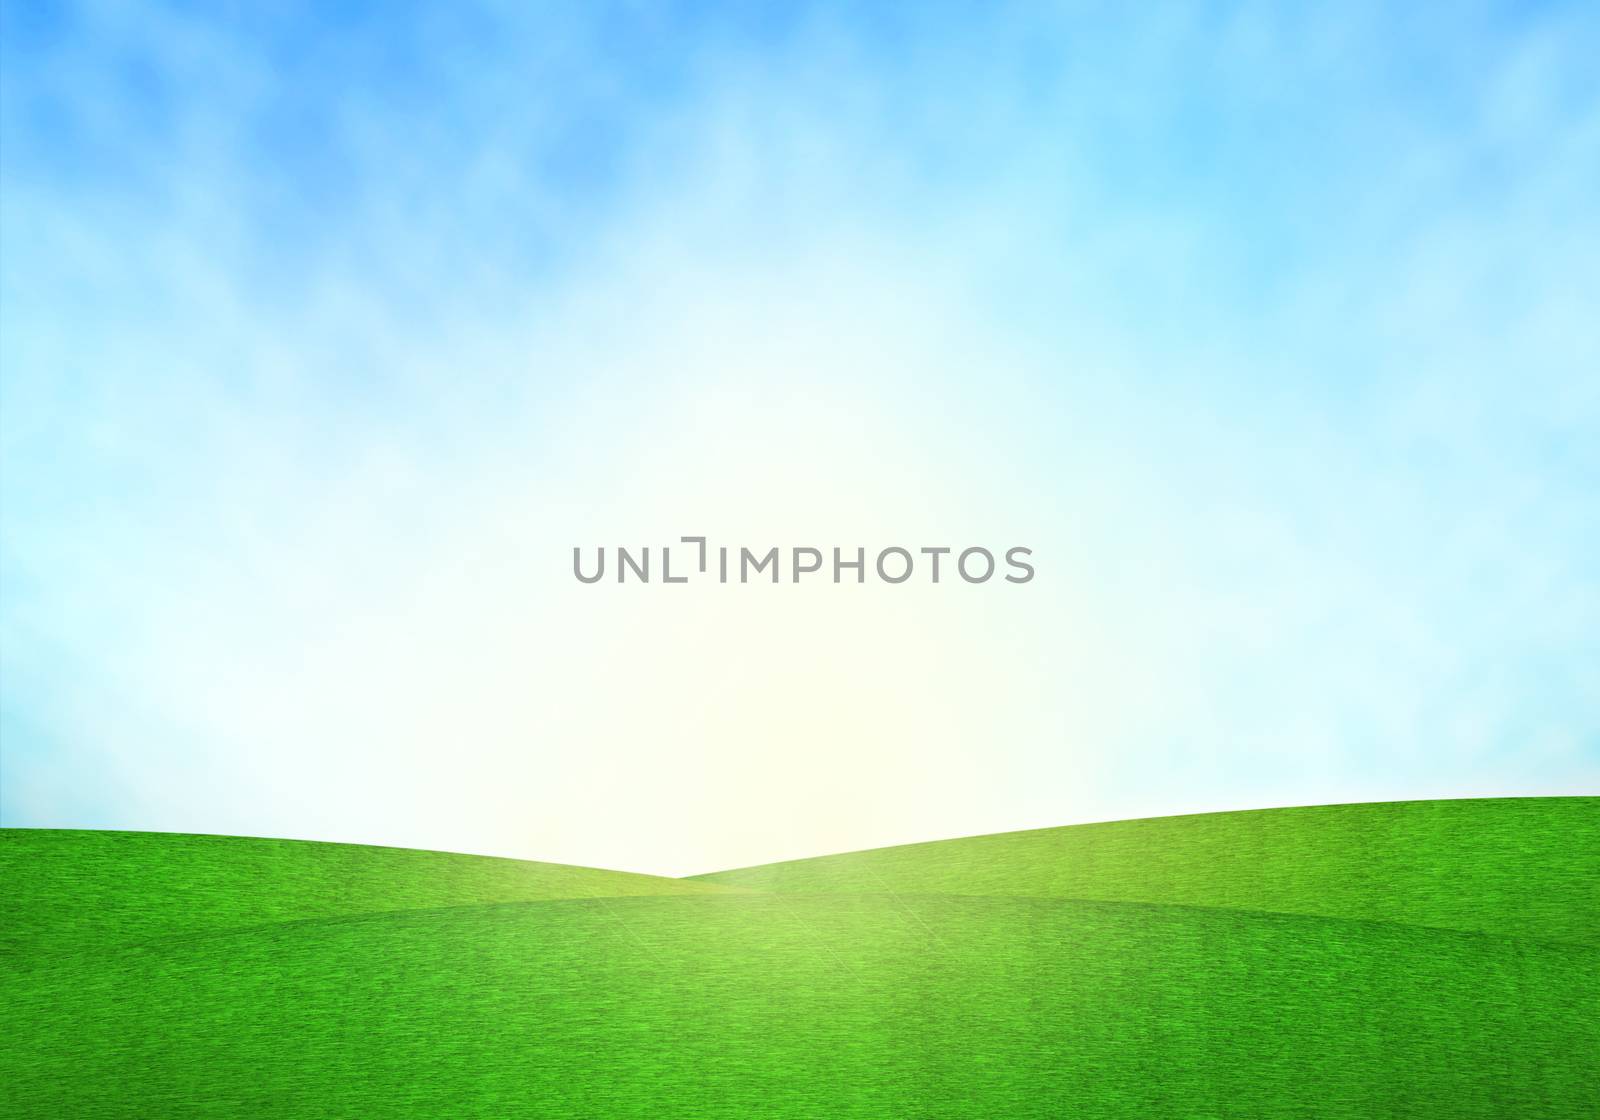 Green field, blue sky and lighting flare on grass.